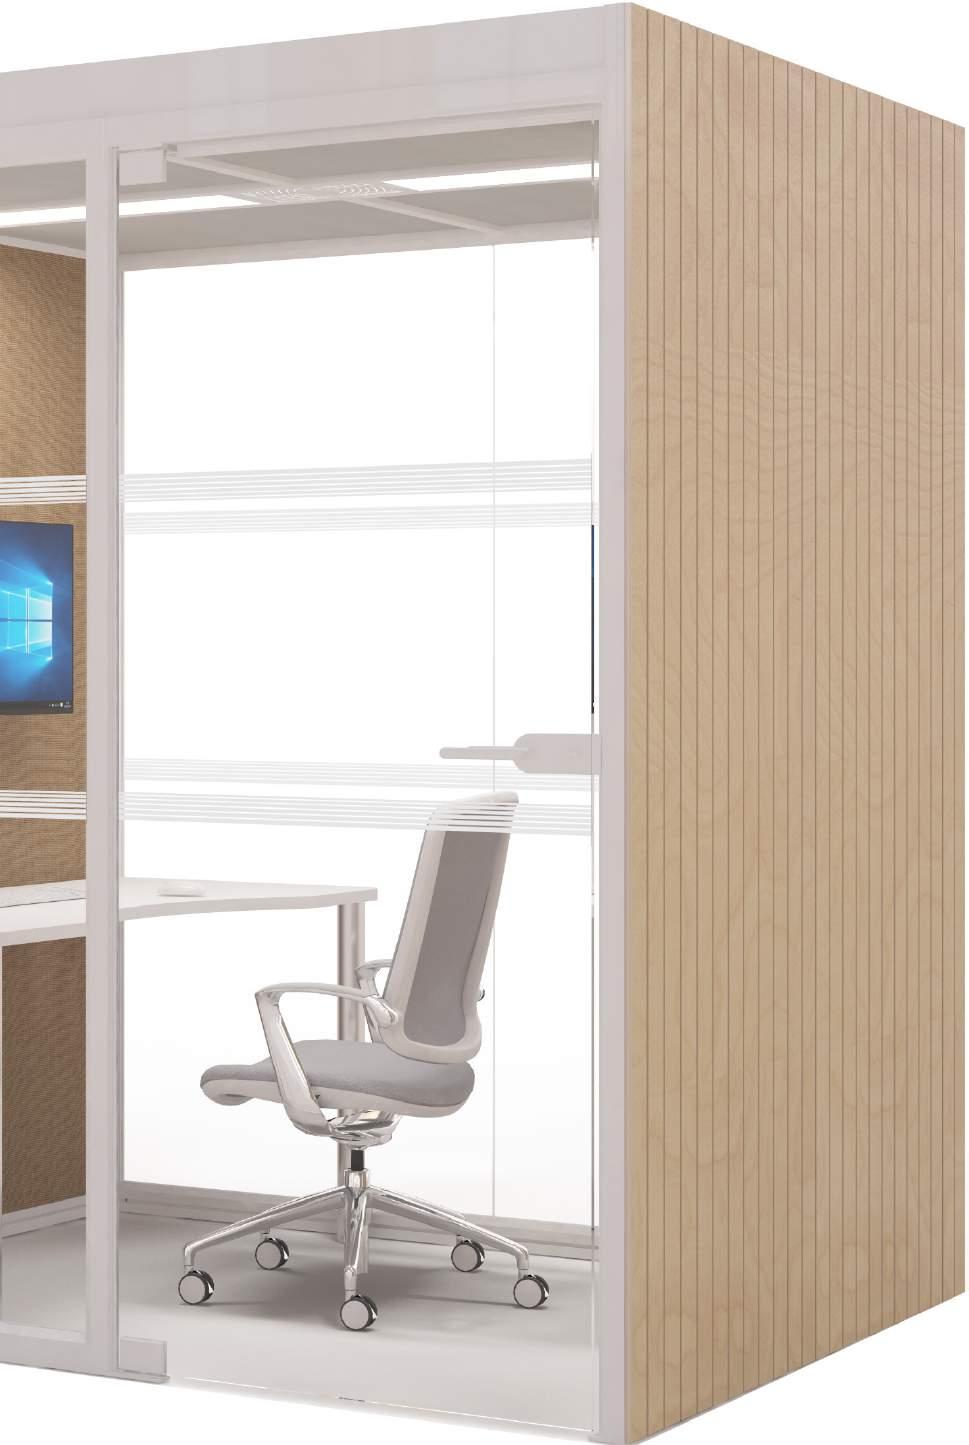 This unique free-standing system provides the perfect break-out space for employees to rest and escape from a busy work environment.